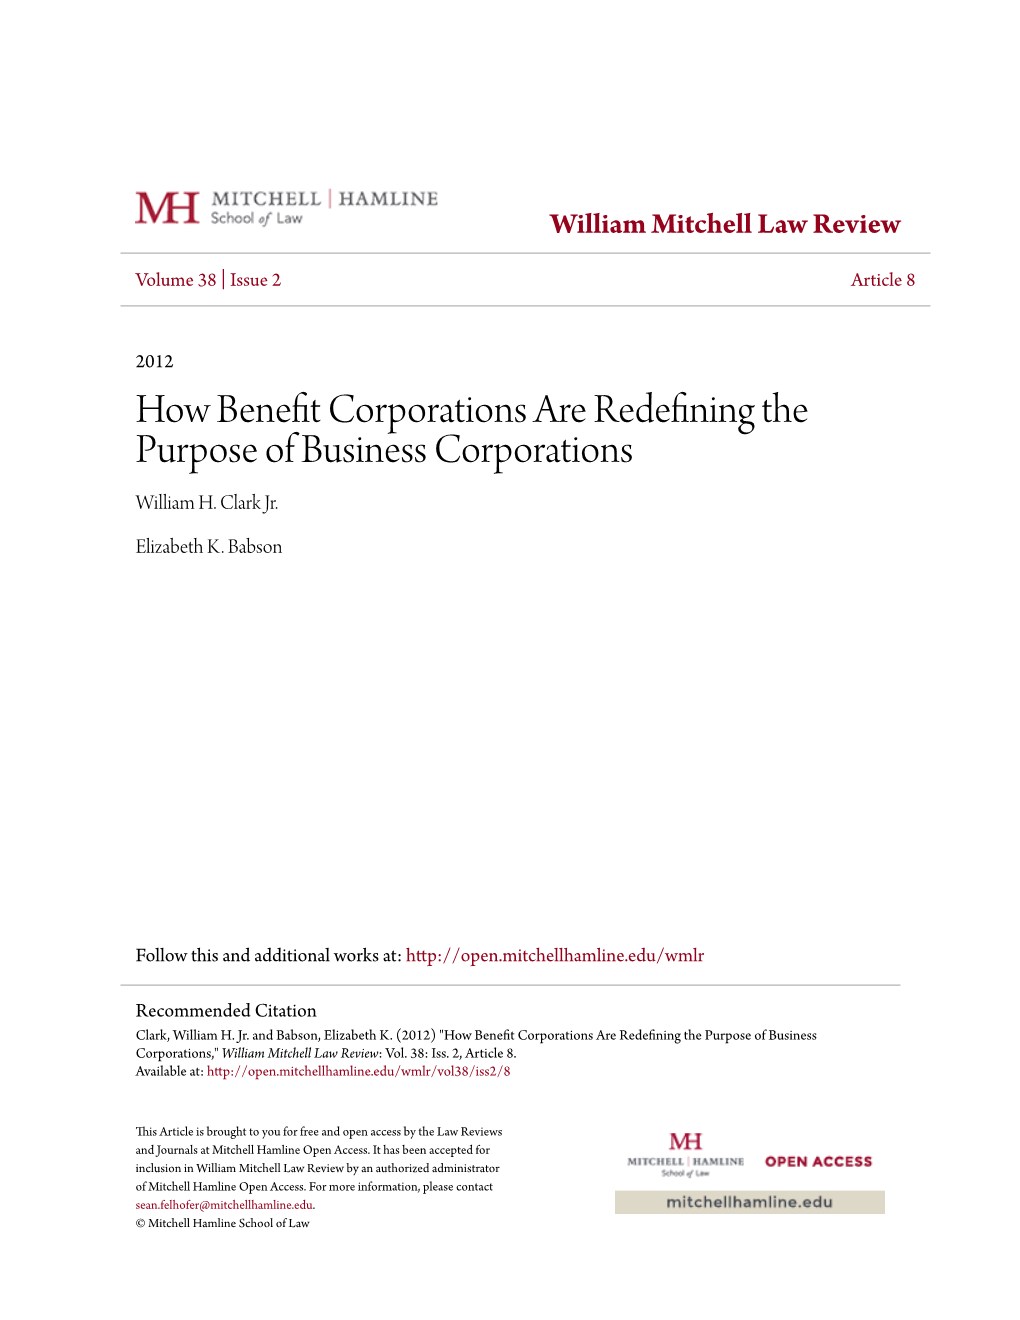 How Benefit Corporations Are Redefining the Purpose of Business C